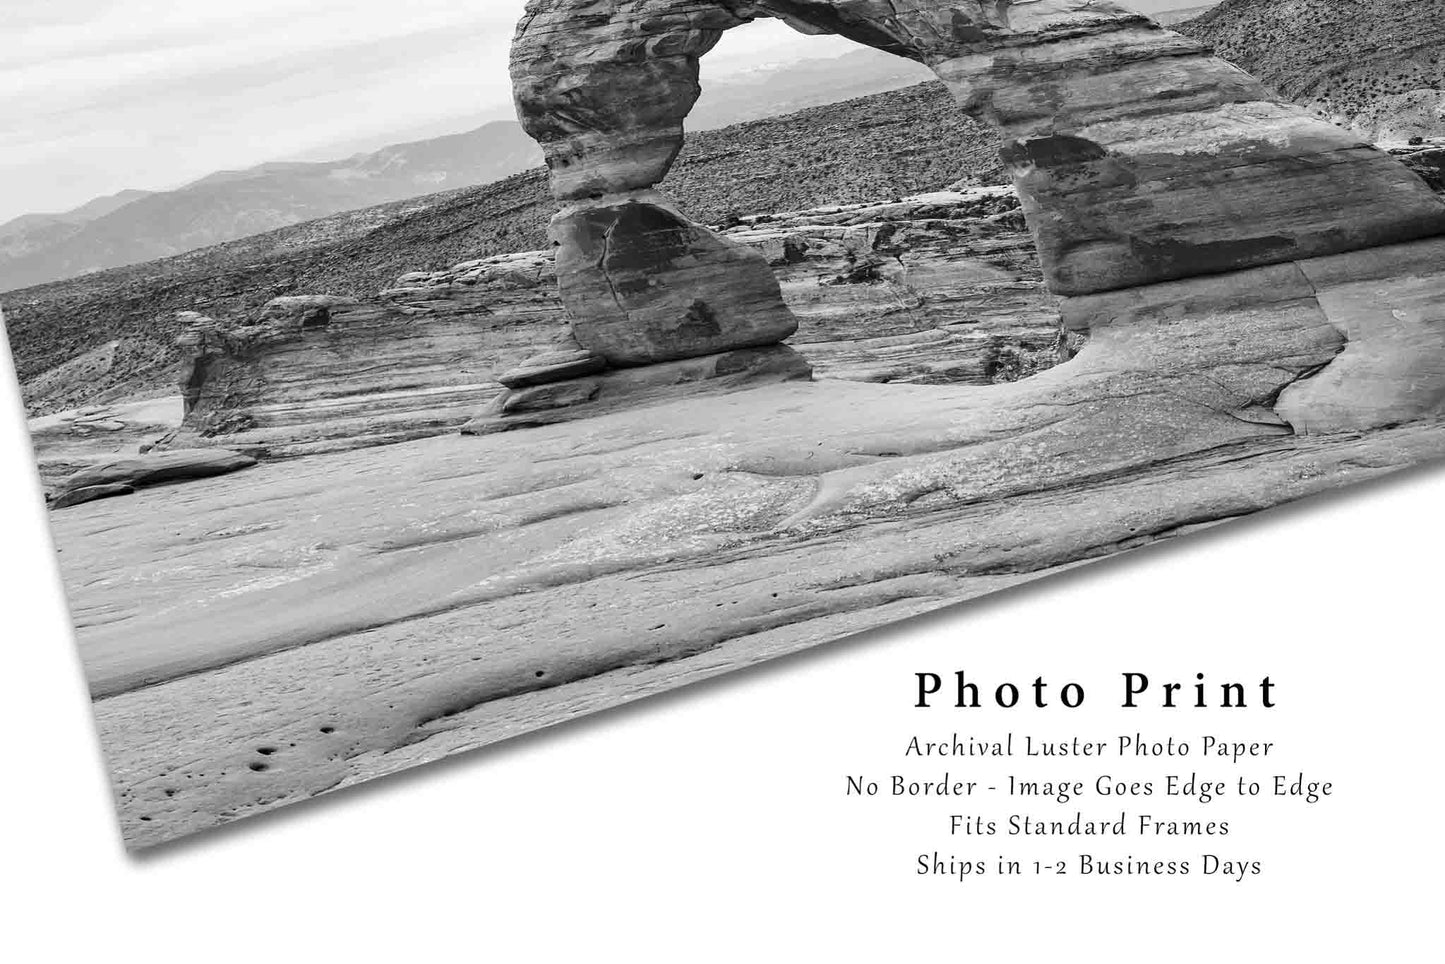 Western Photography Print - Black and White Picture of Delicate Arch Arches National Park Utah - Southwestern Wall Art Photo Artwork Decor